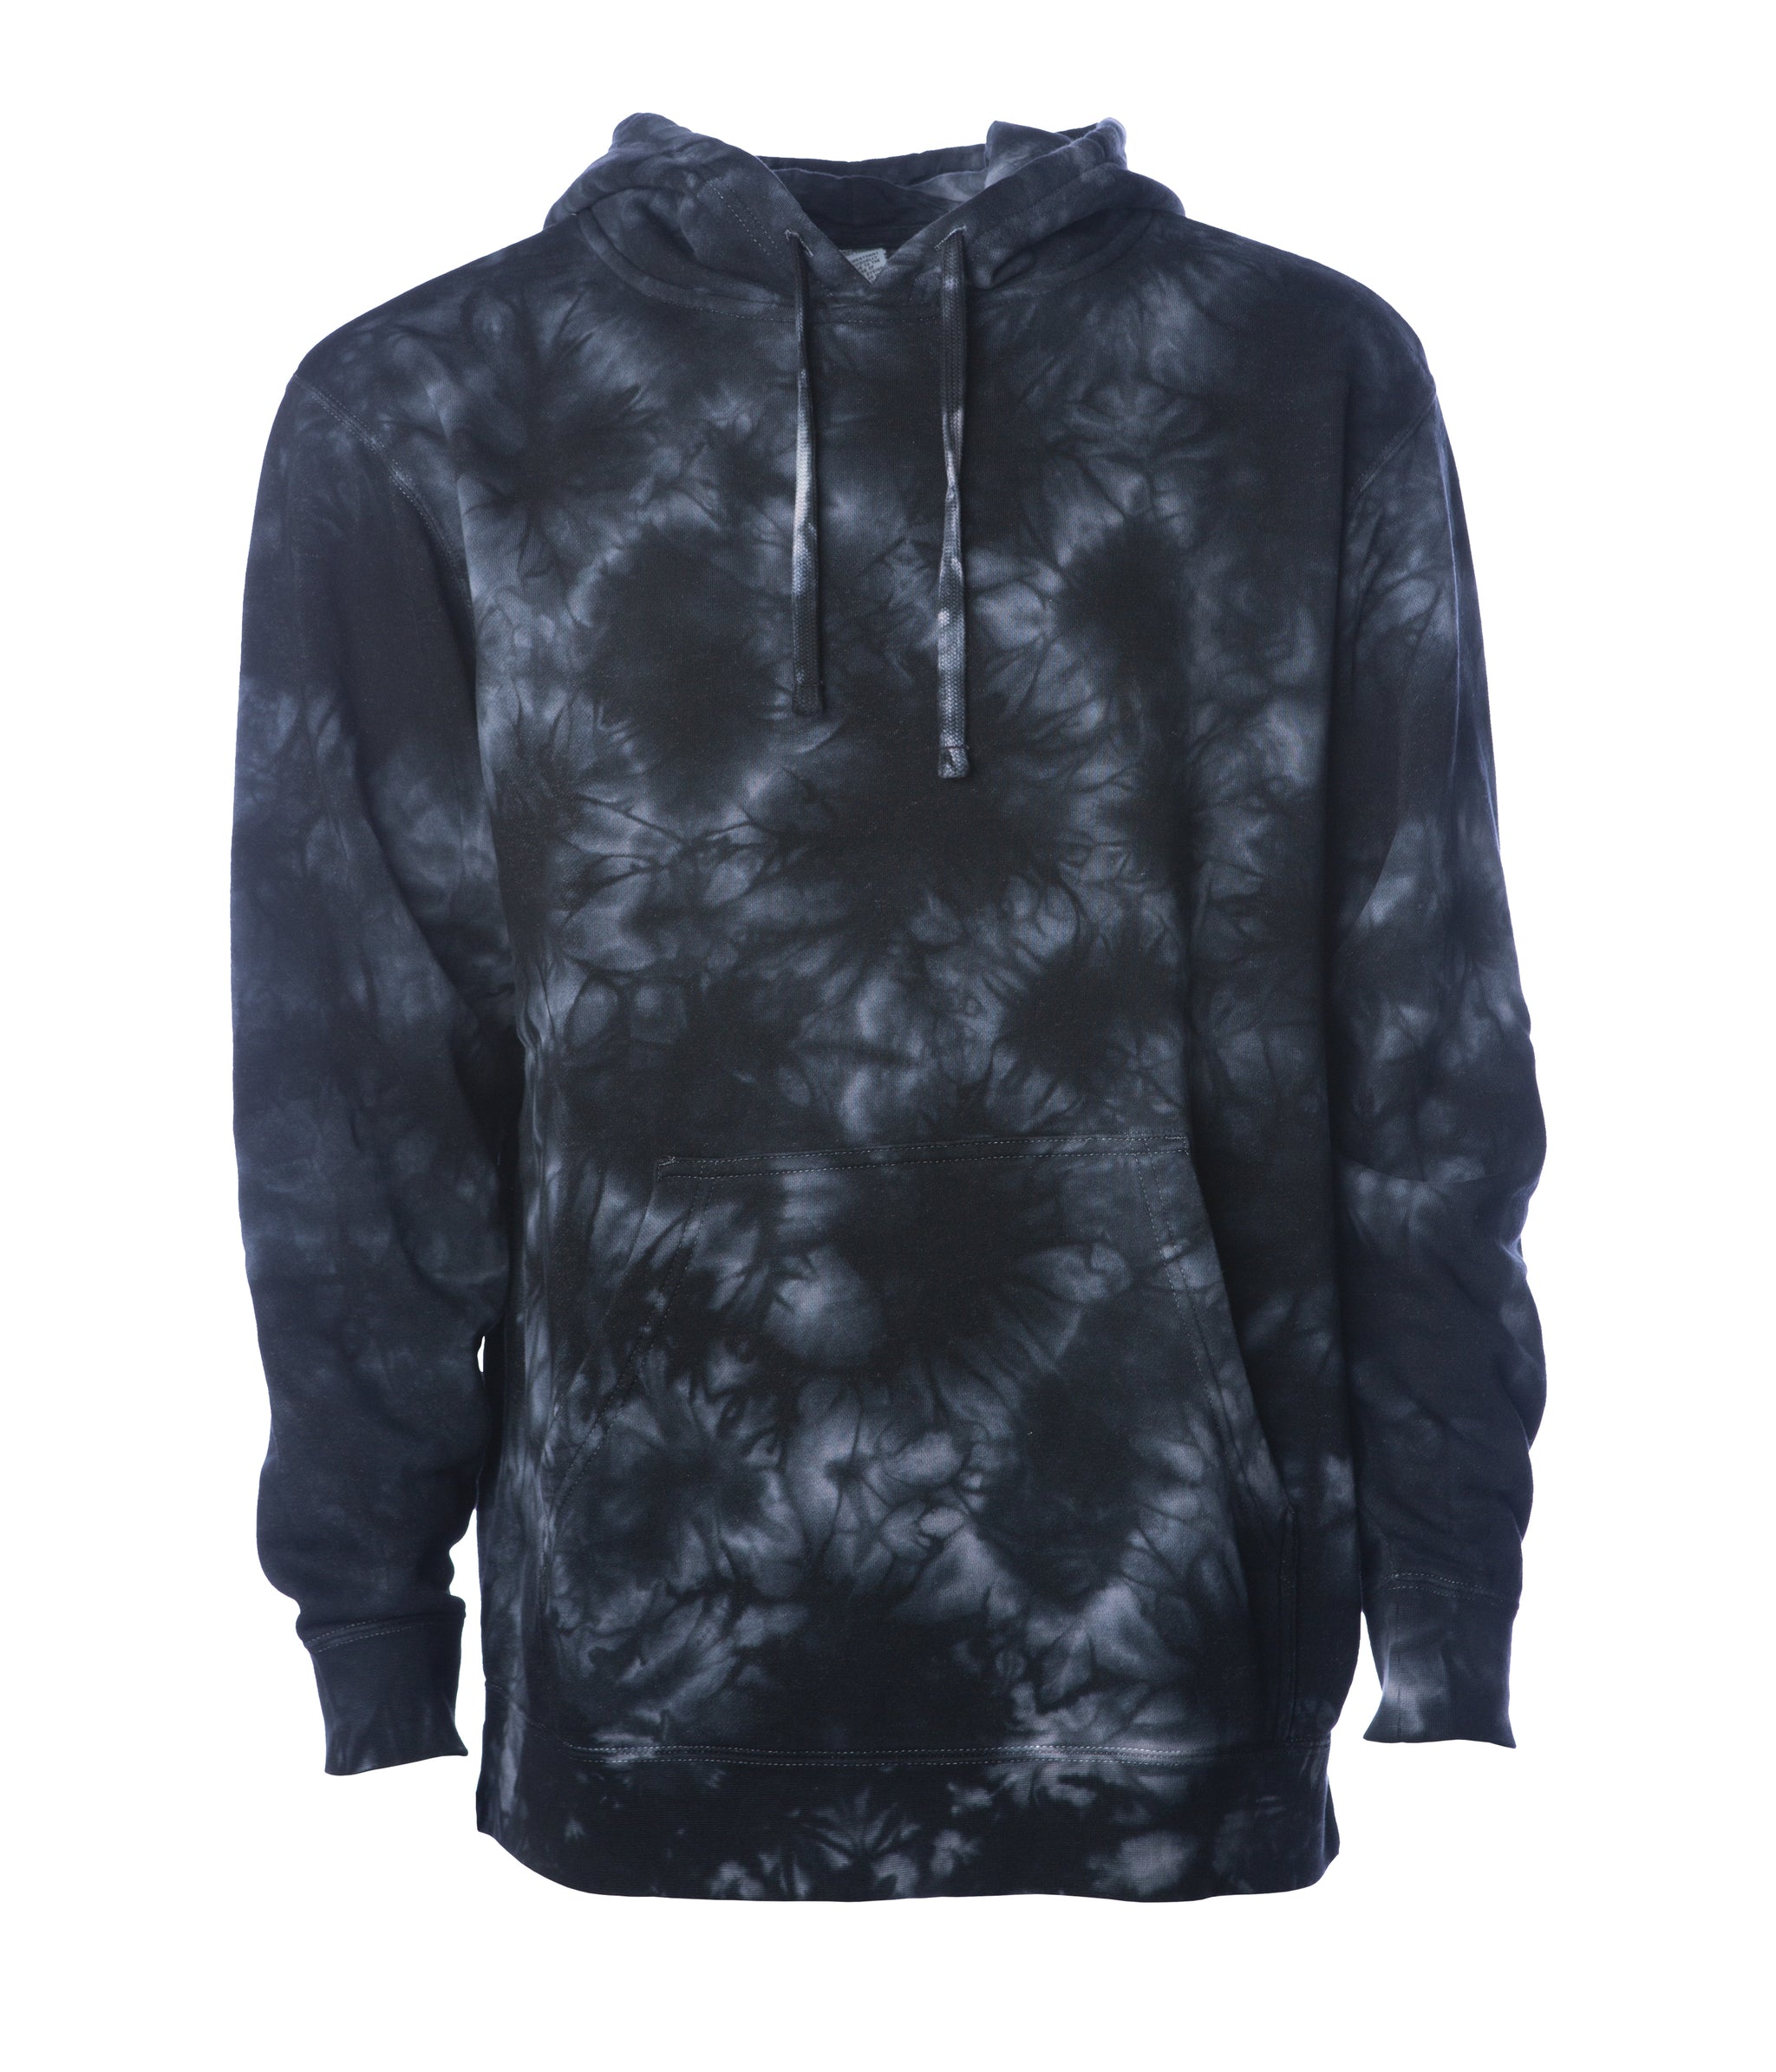 Unisex Tie Dye Hooded Pullover Sweatshirt  Independent Trading Co. -  Independent Trading Company